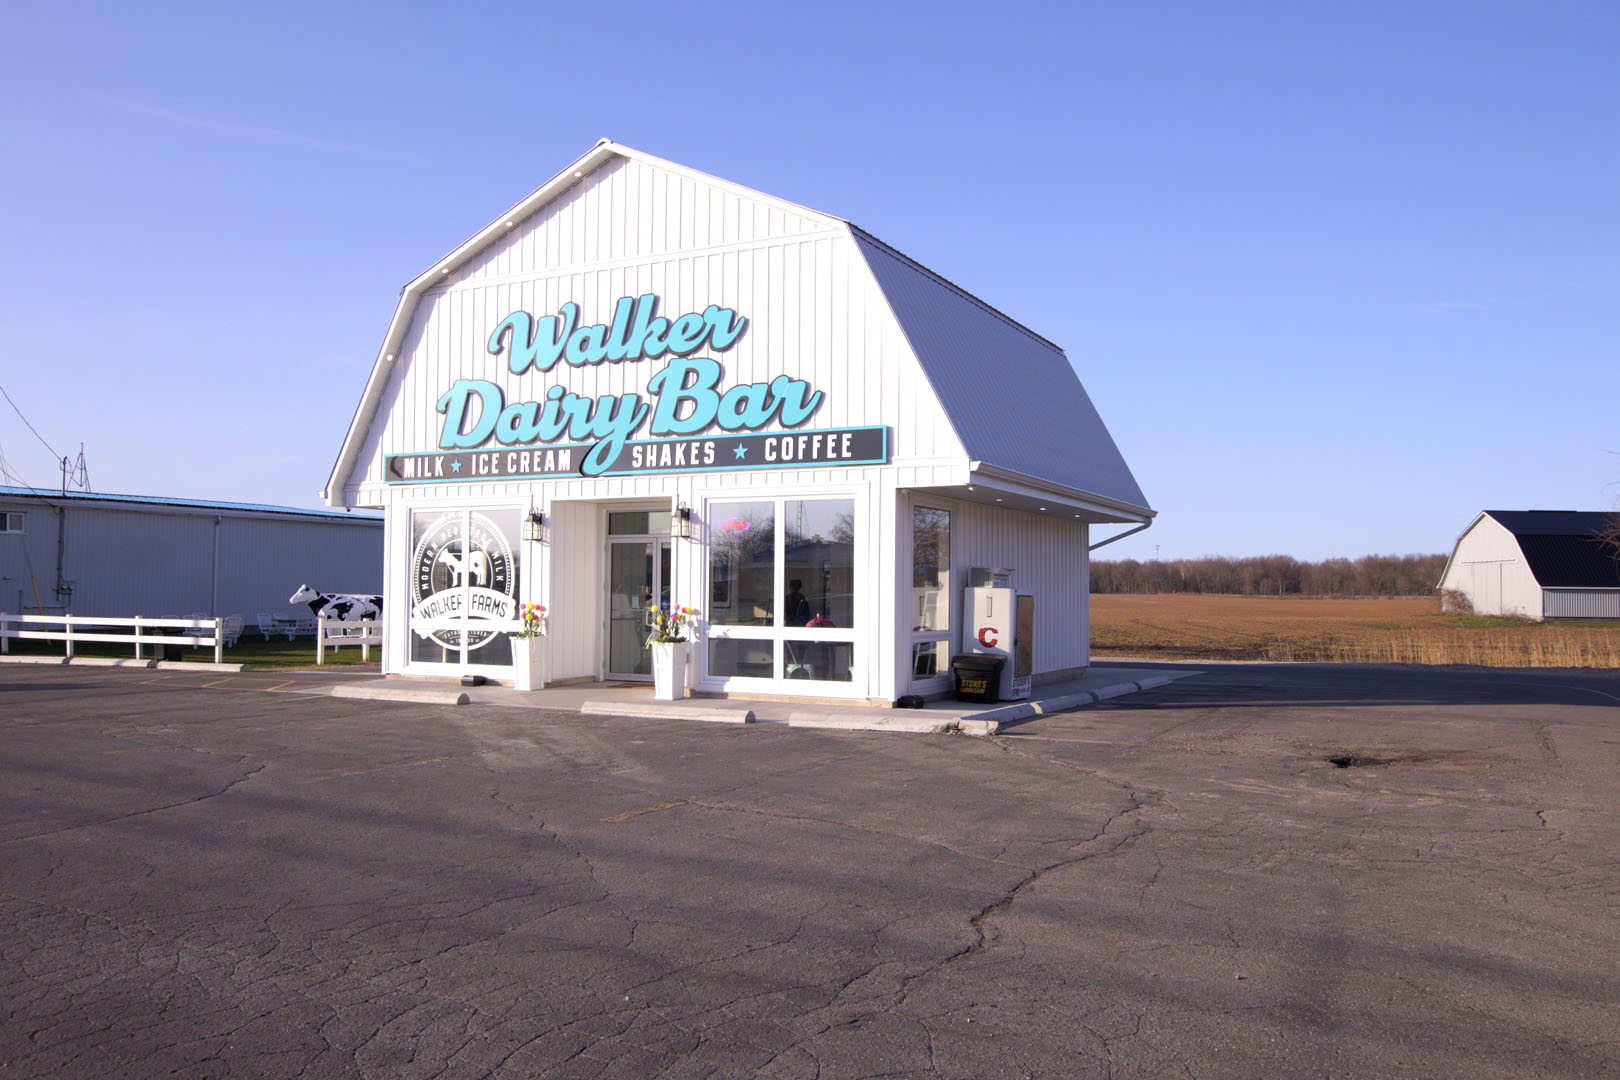 Walker Dairy Bar in Aylmer Ontario featuring Walker Farms A2 protein milk and other local products, including Shaw's Ice Cream, Las Chicas Coffee, Mr. Amish butter/eggs/maple syrup, Sassy's homemade bread, Stoll's Honey and baked goods from Grandma's Oven, Spicer's Bakery, Helm Baked and the Fritter Shop.